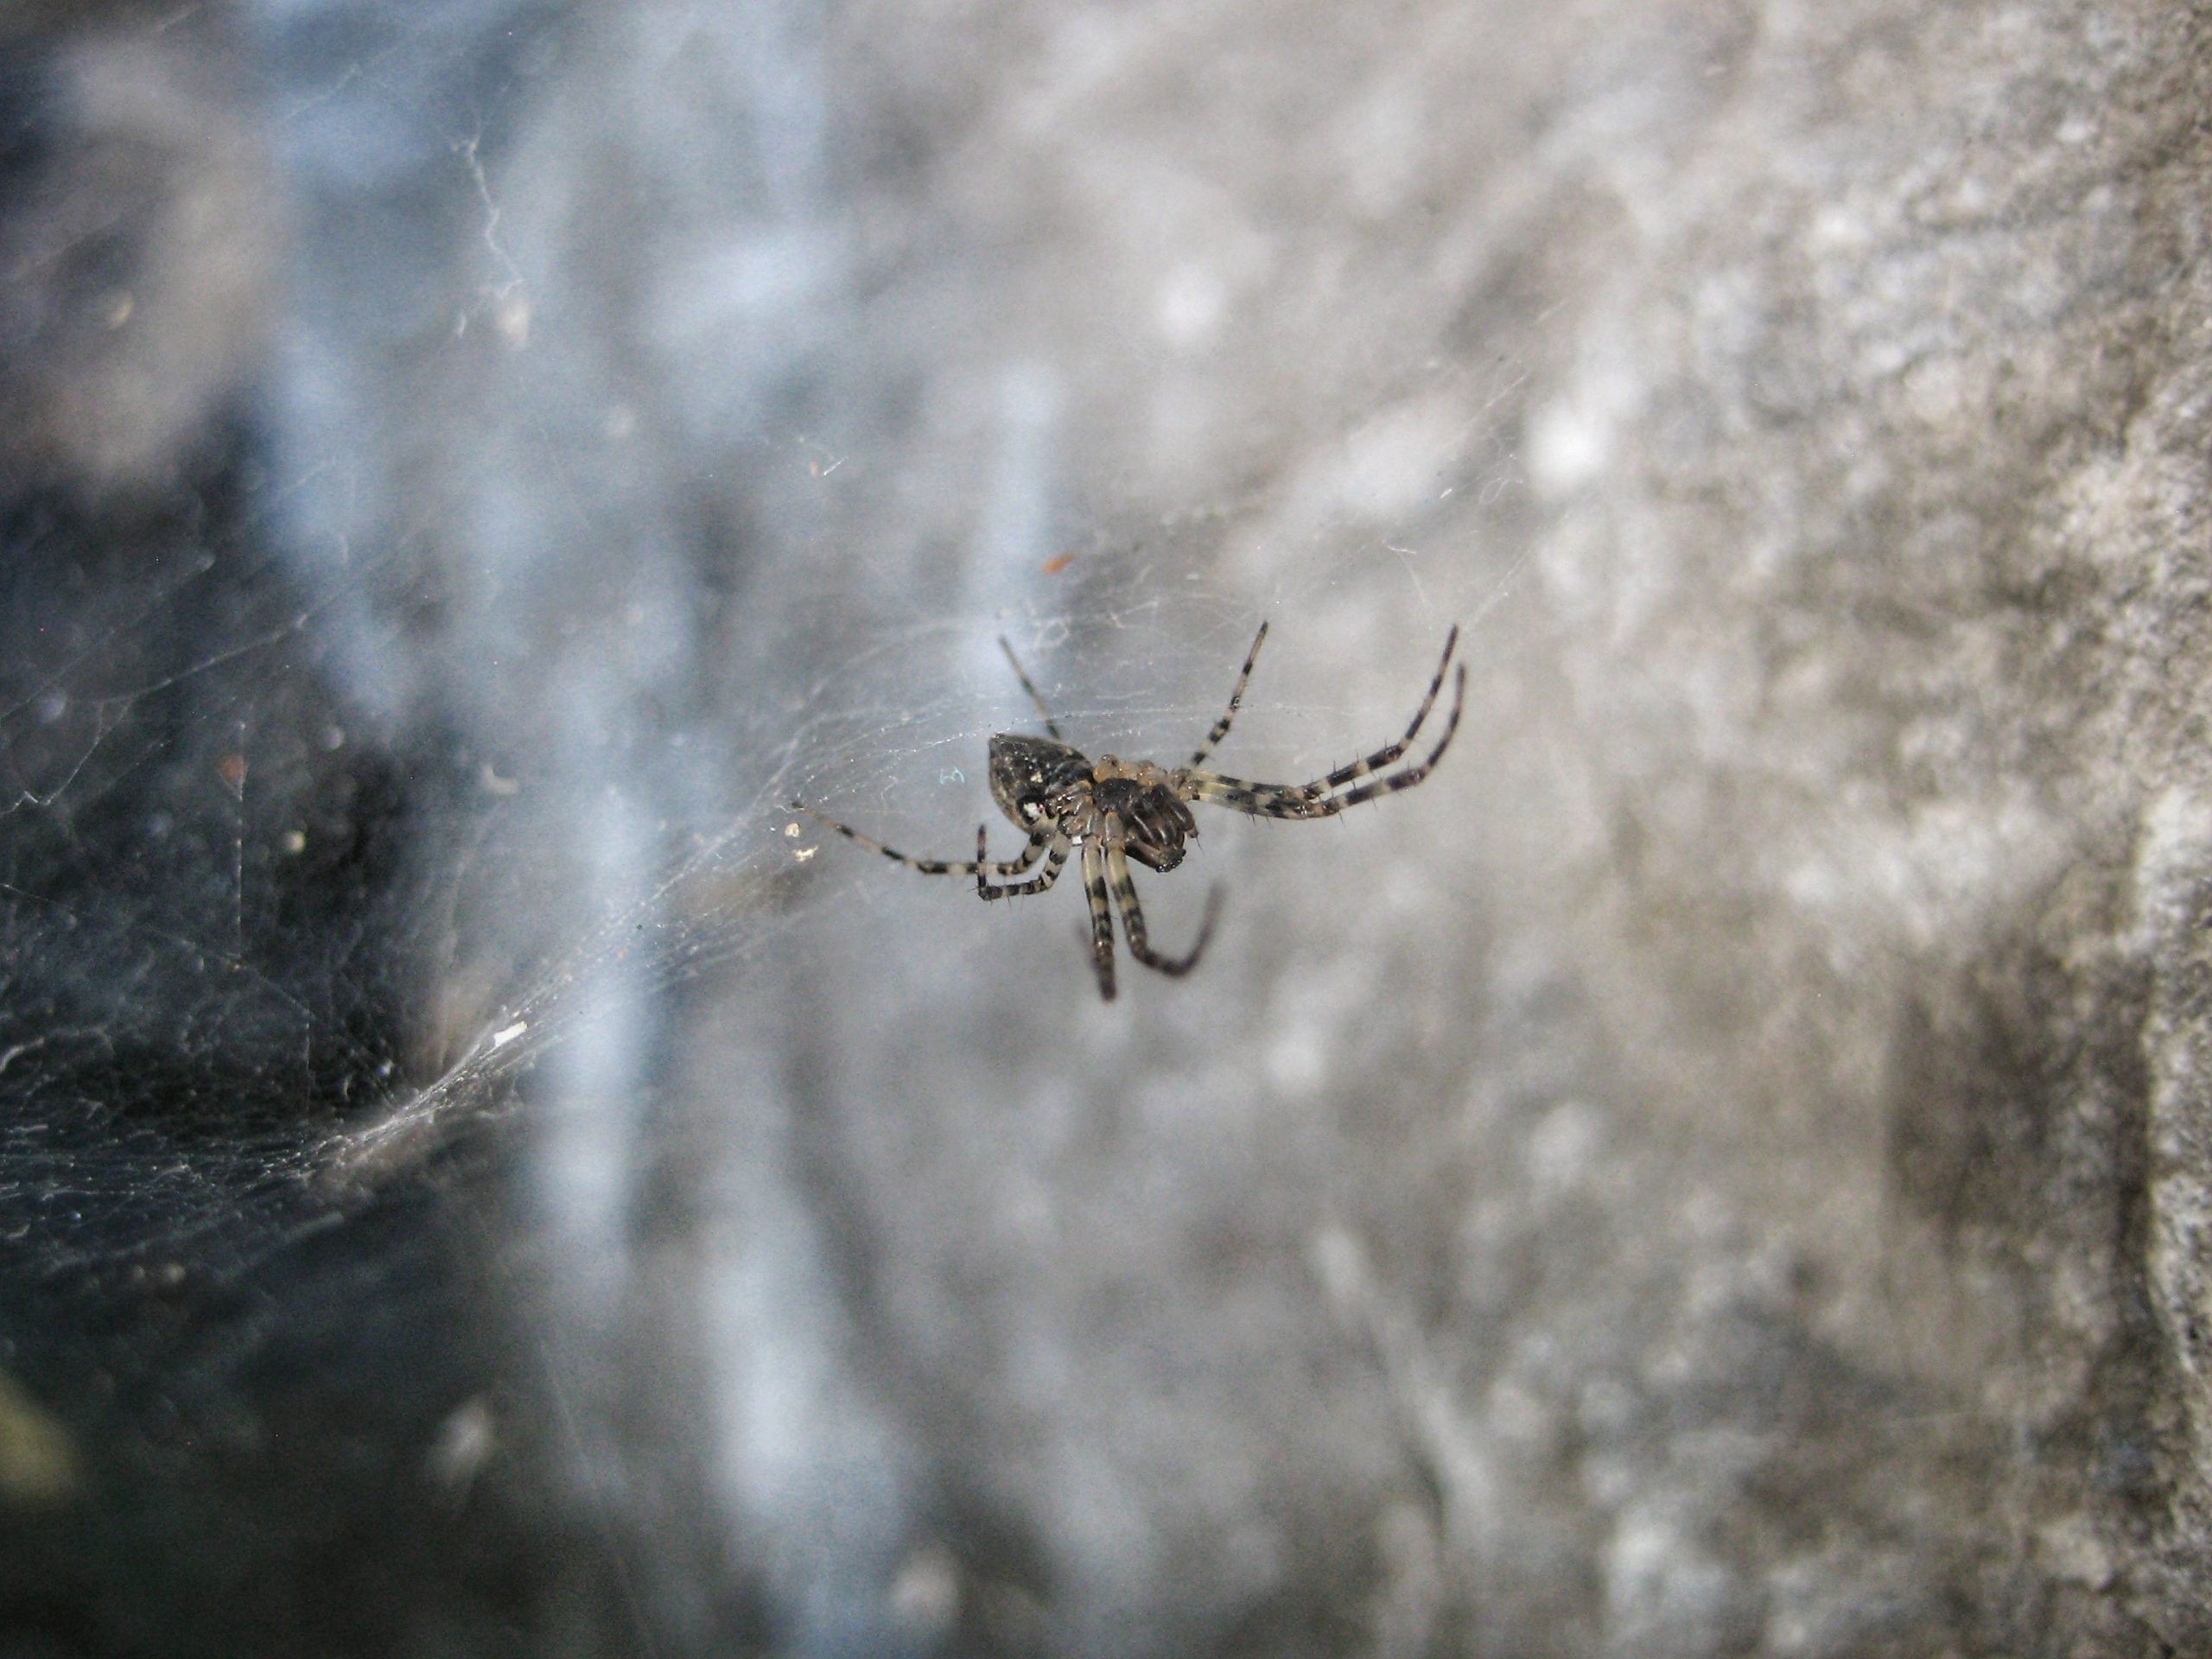 A medium-size spider, dark grey-brown with small white markings, in her web in a crevice between rocks